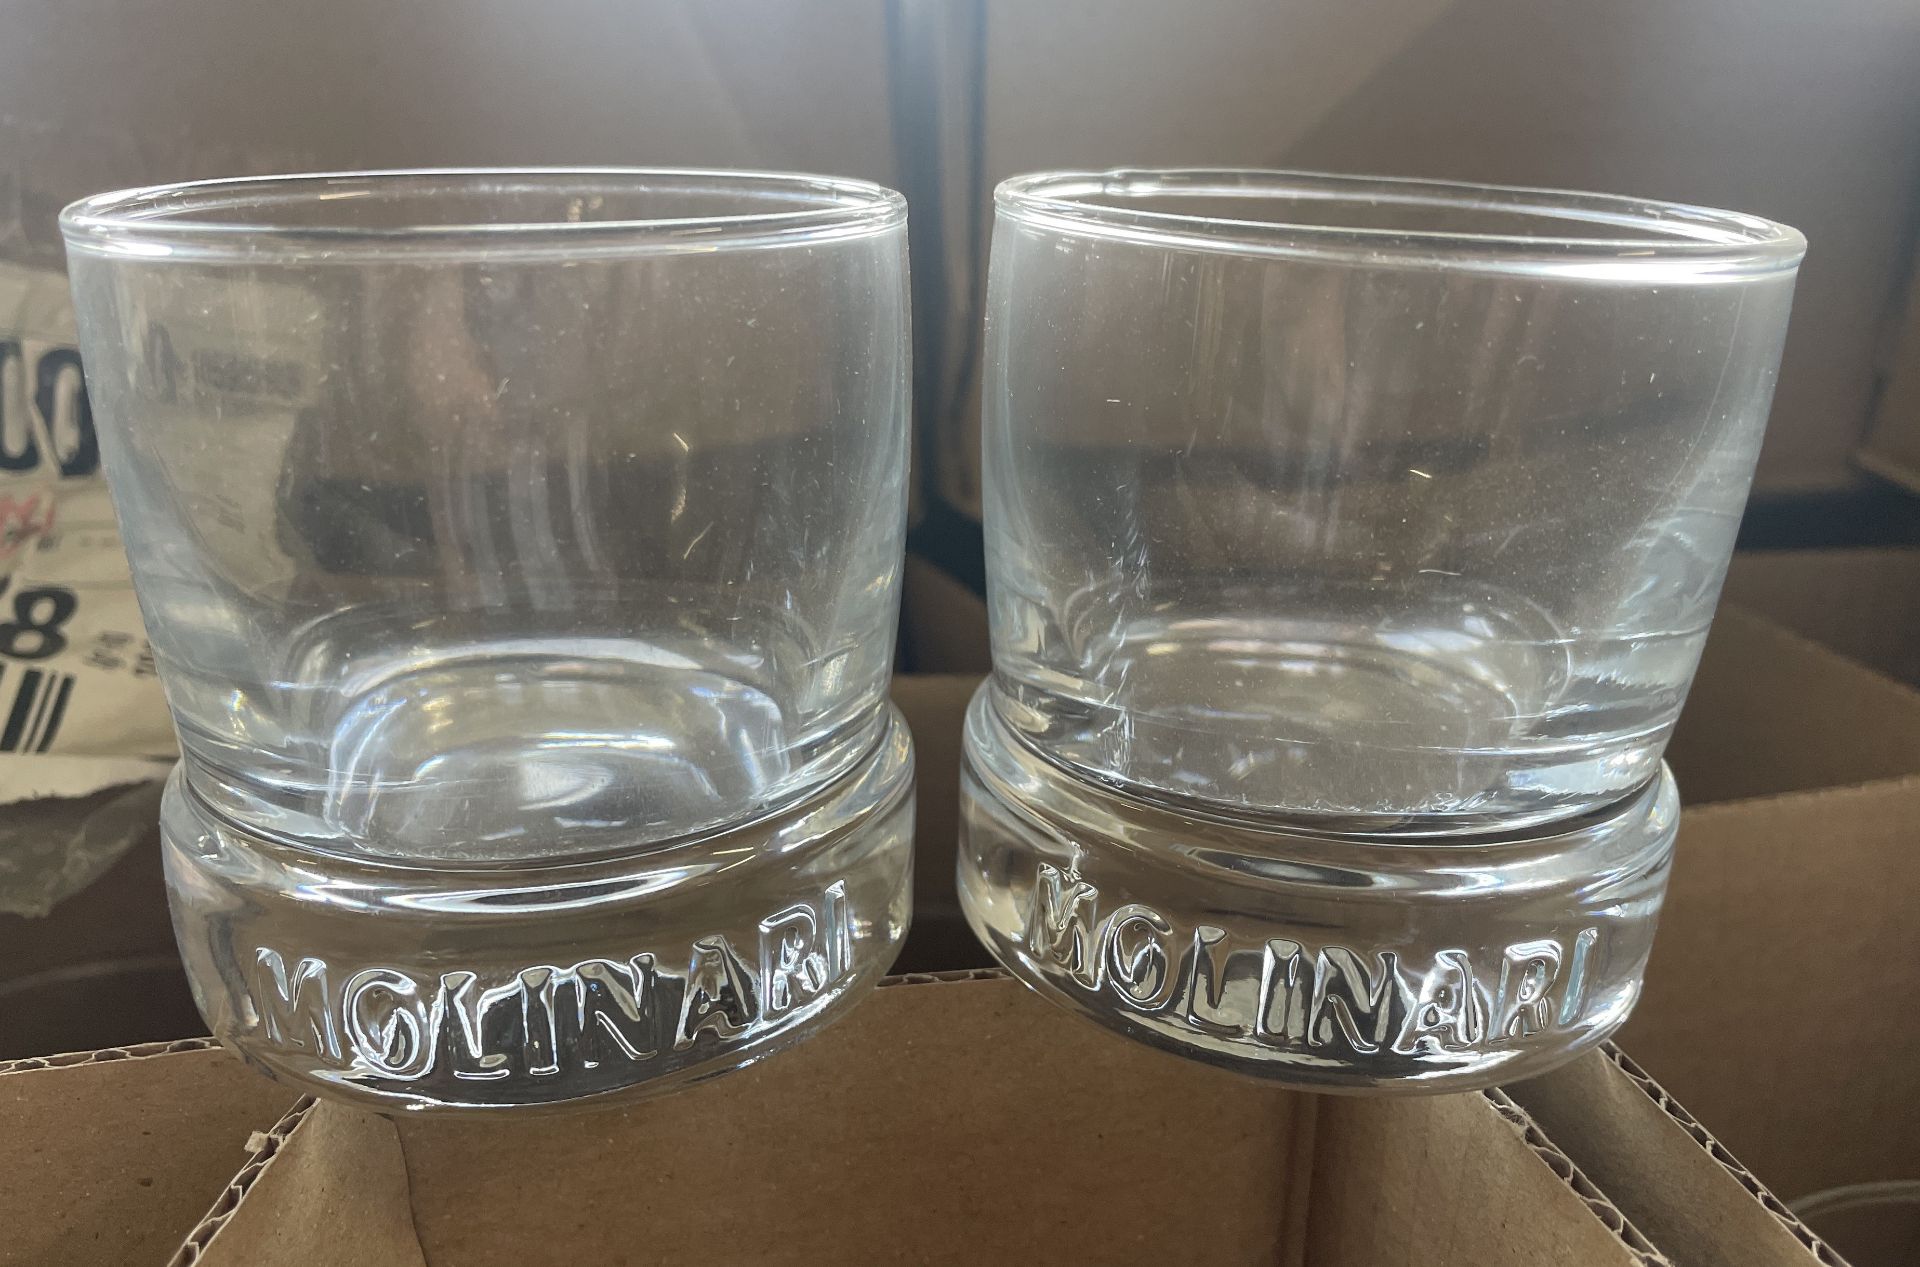 Job lot of Glasses, Whiskey tumblers, shot glasses & more - over 4000 - see description for contents - Image 5 of 13